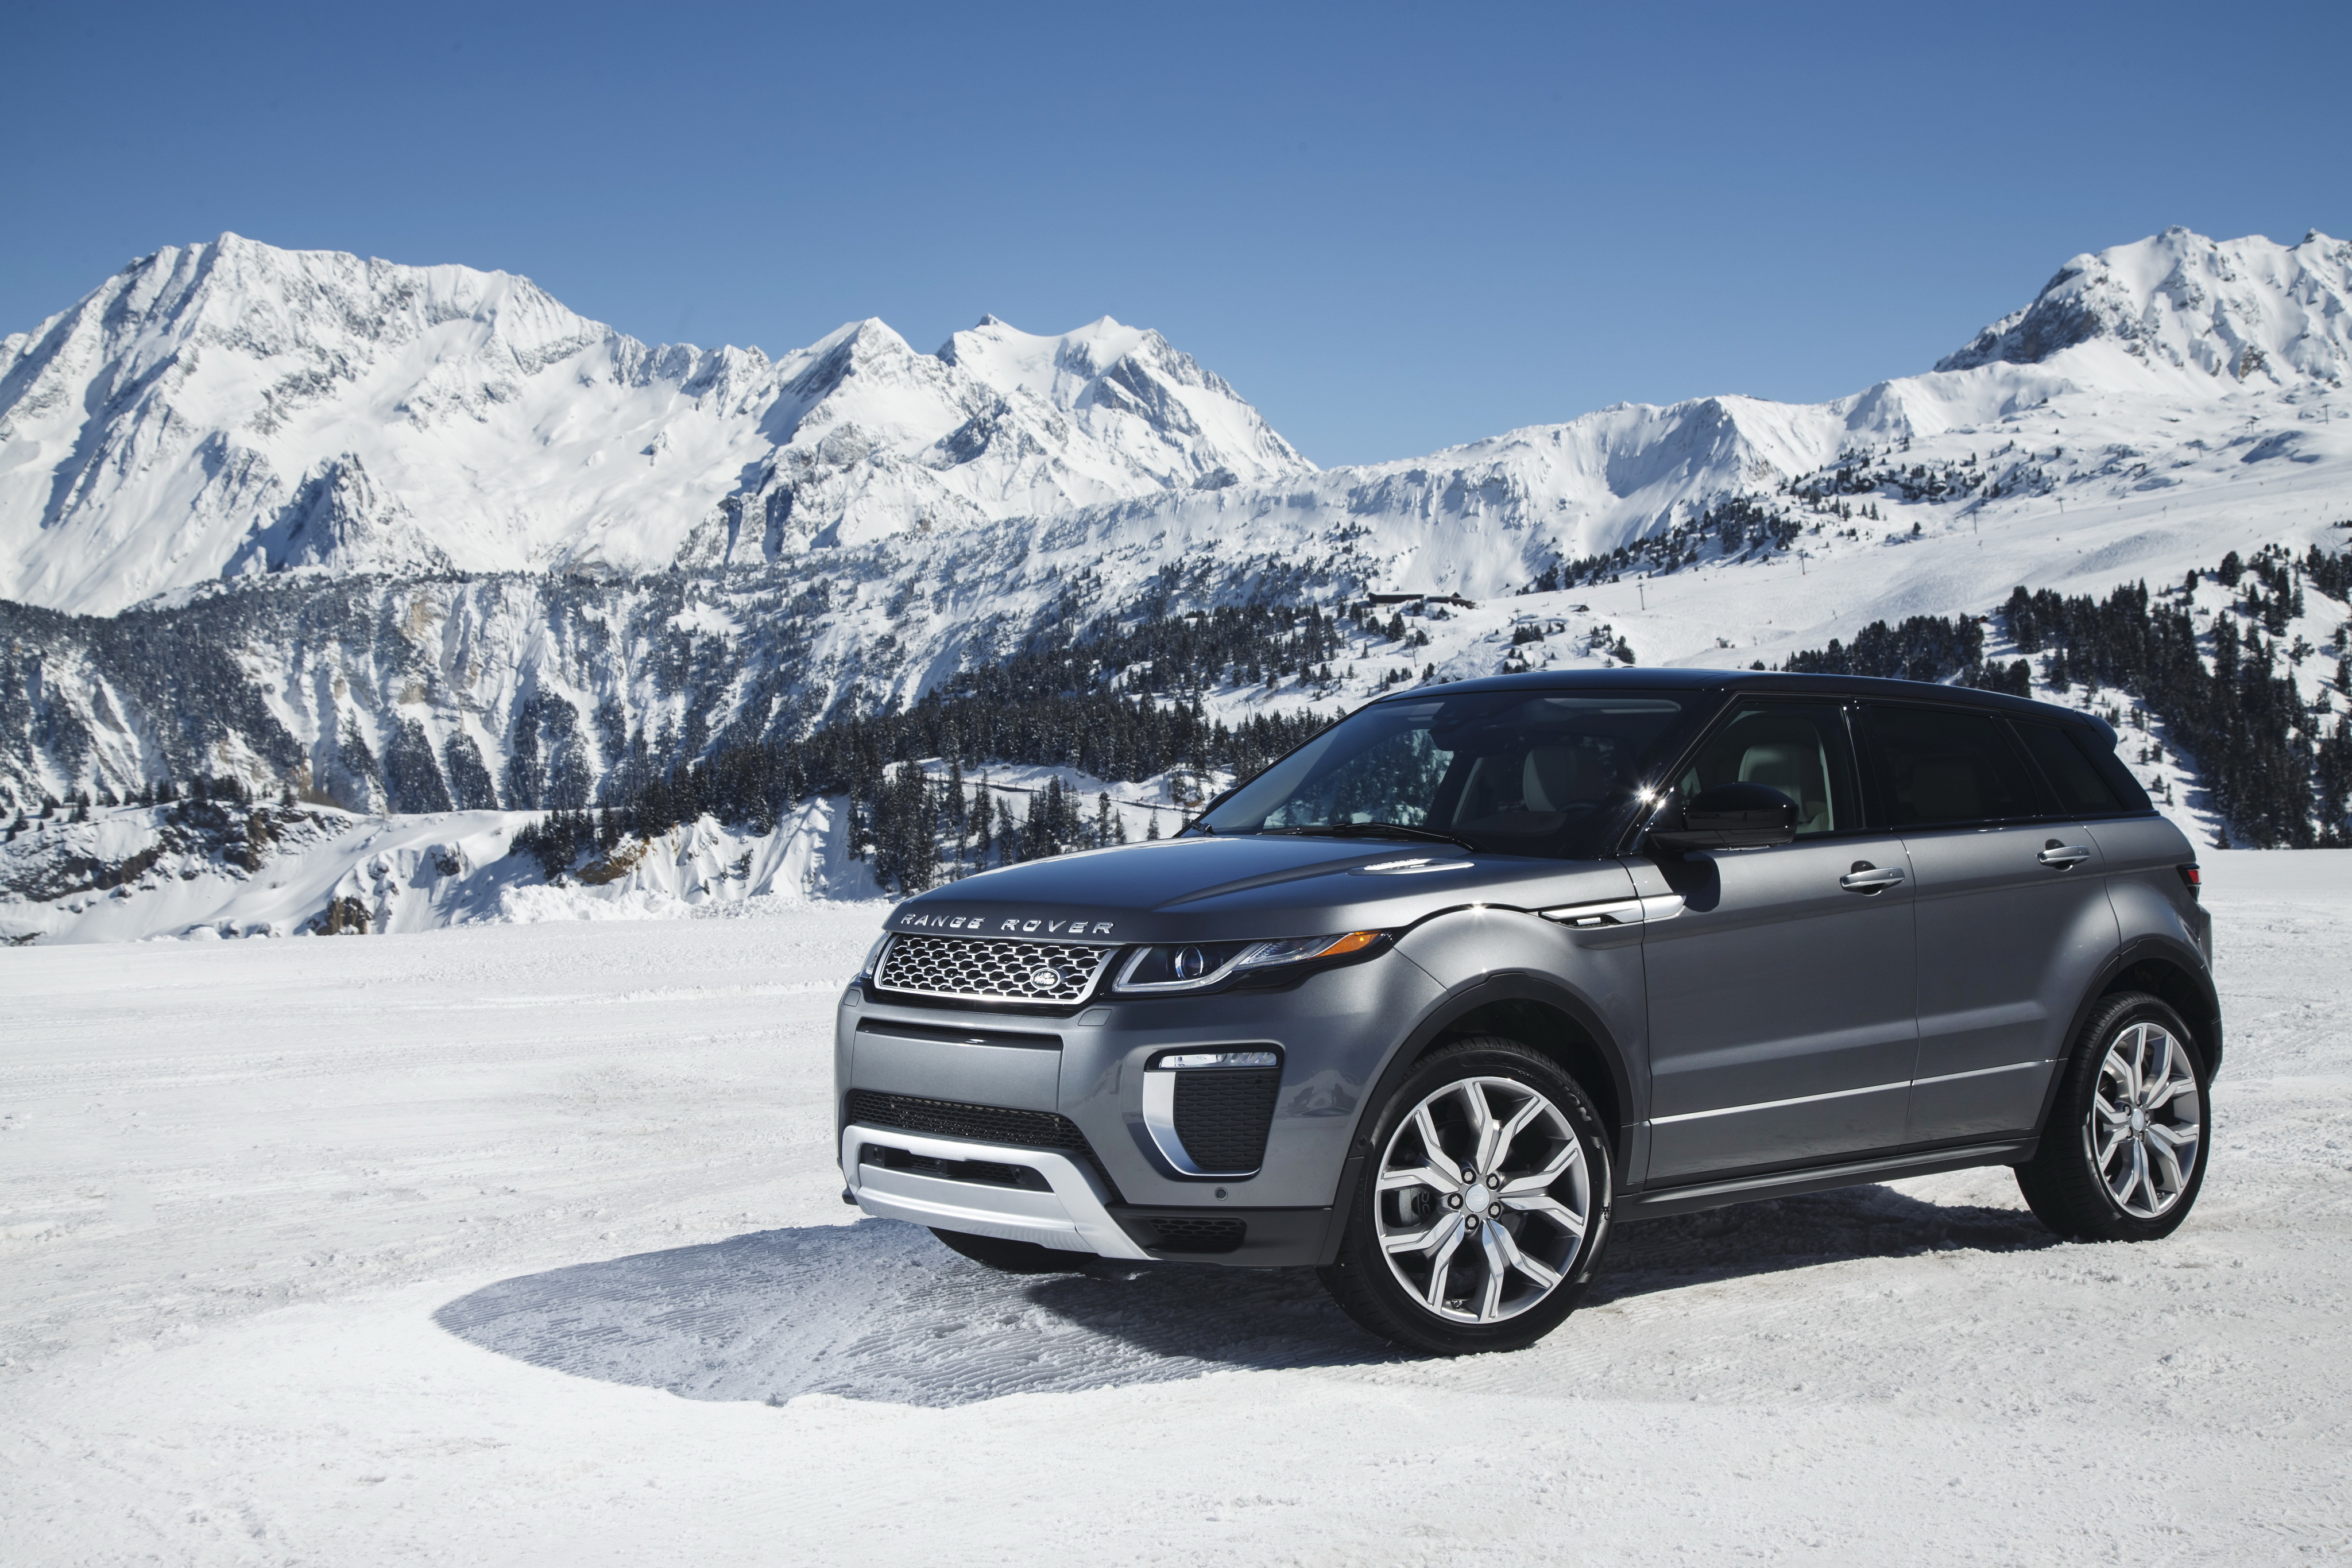 range rover, cars, land rover, snow, side view phone wallpaper